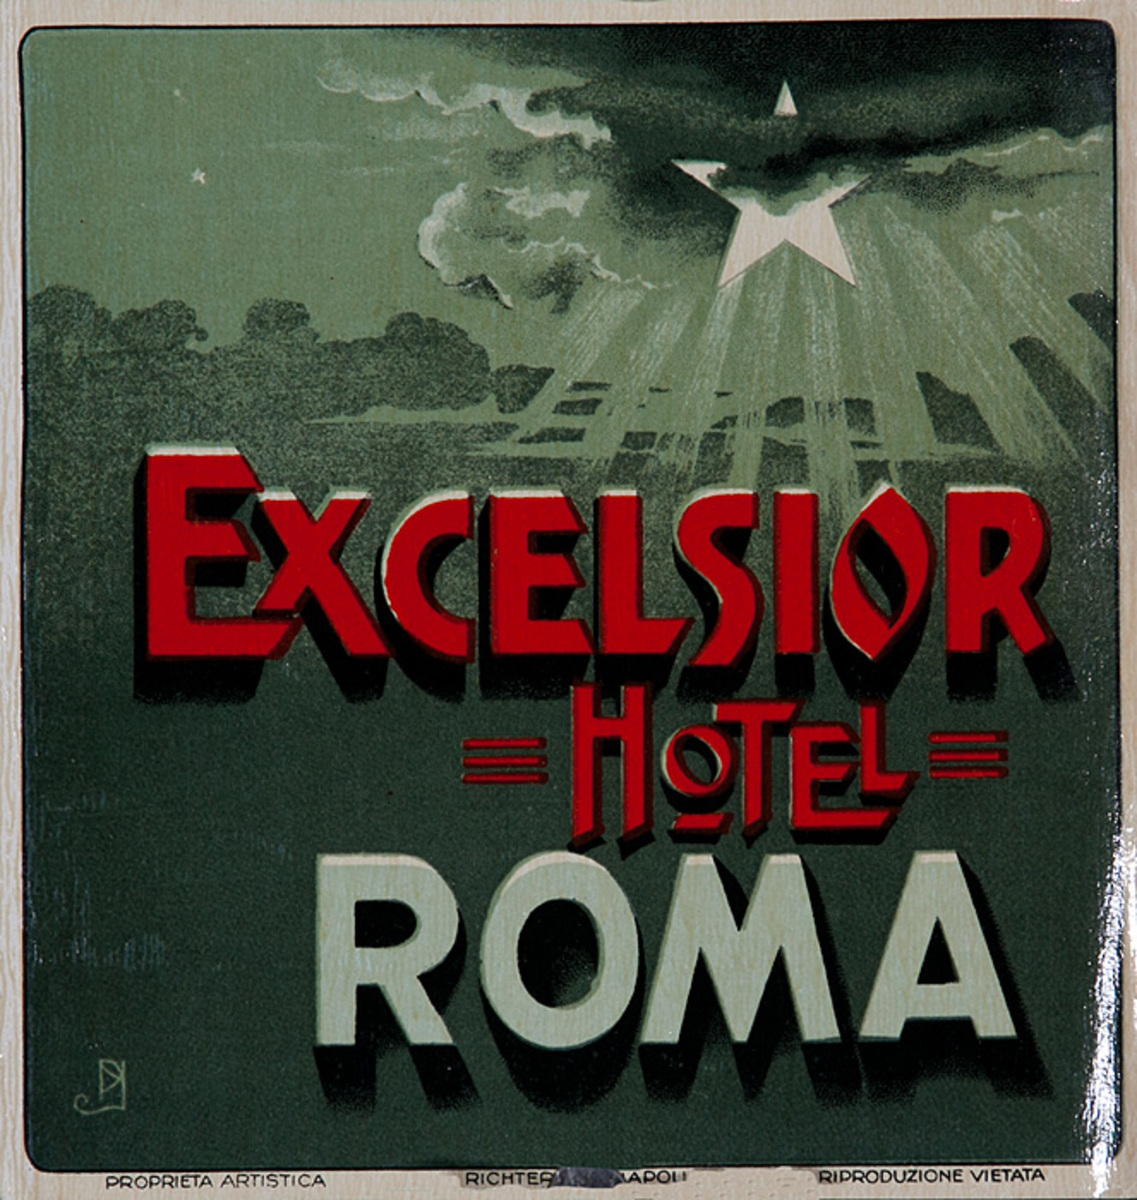 Excelsior Hotel Rome Italy Original Luggage Label